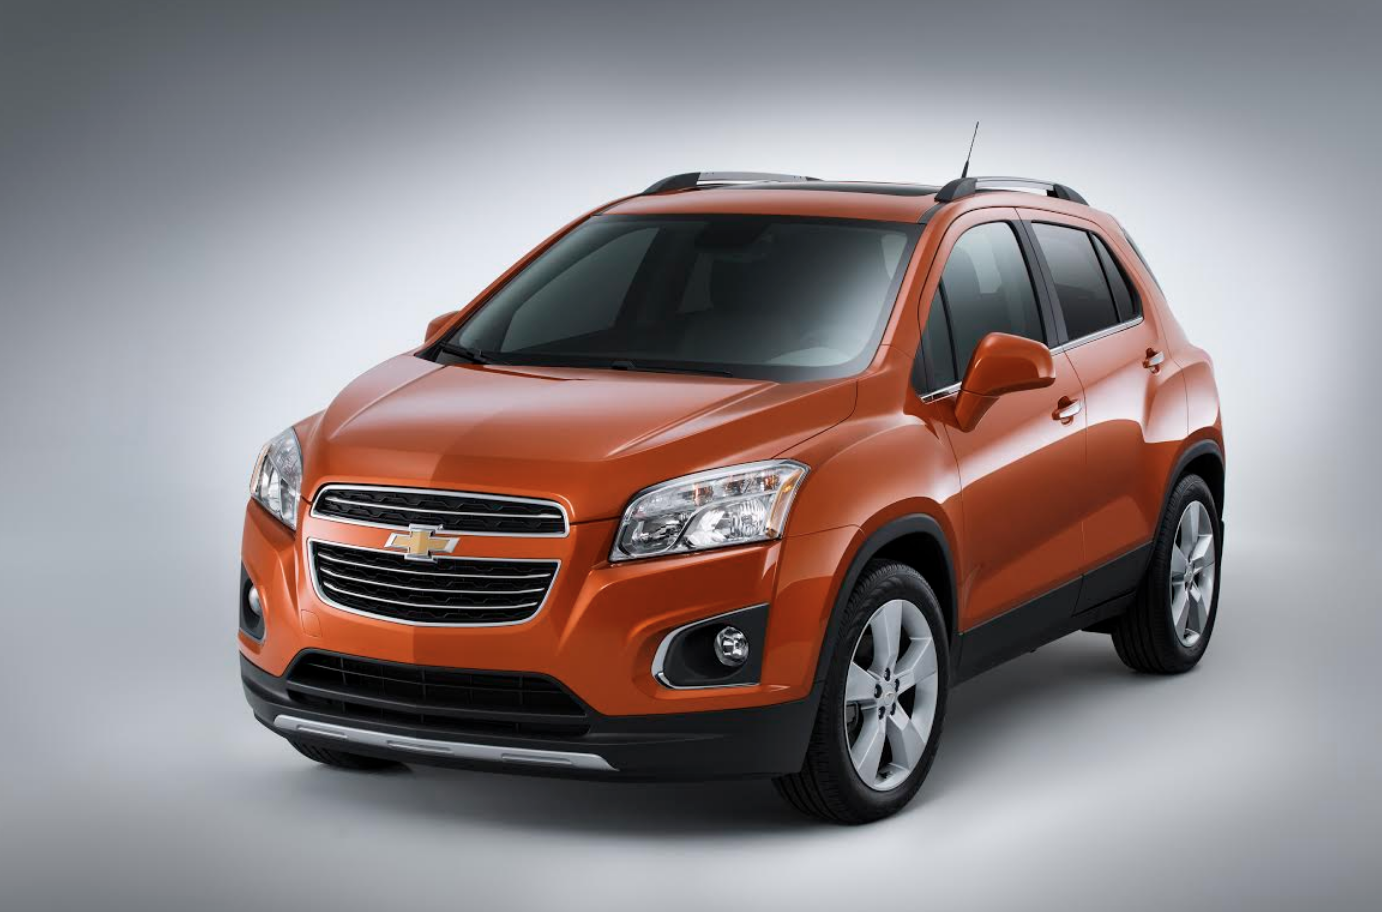 Chevrolet in 2015: All-New Trax Small Crossover, Updated Cruze